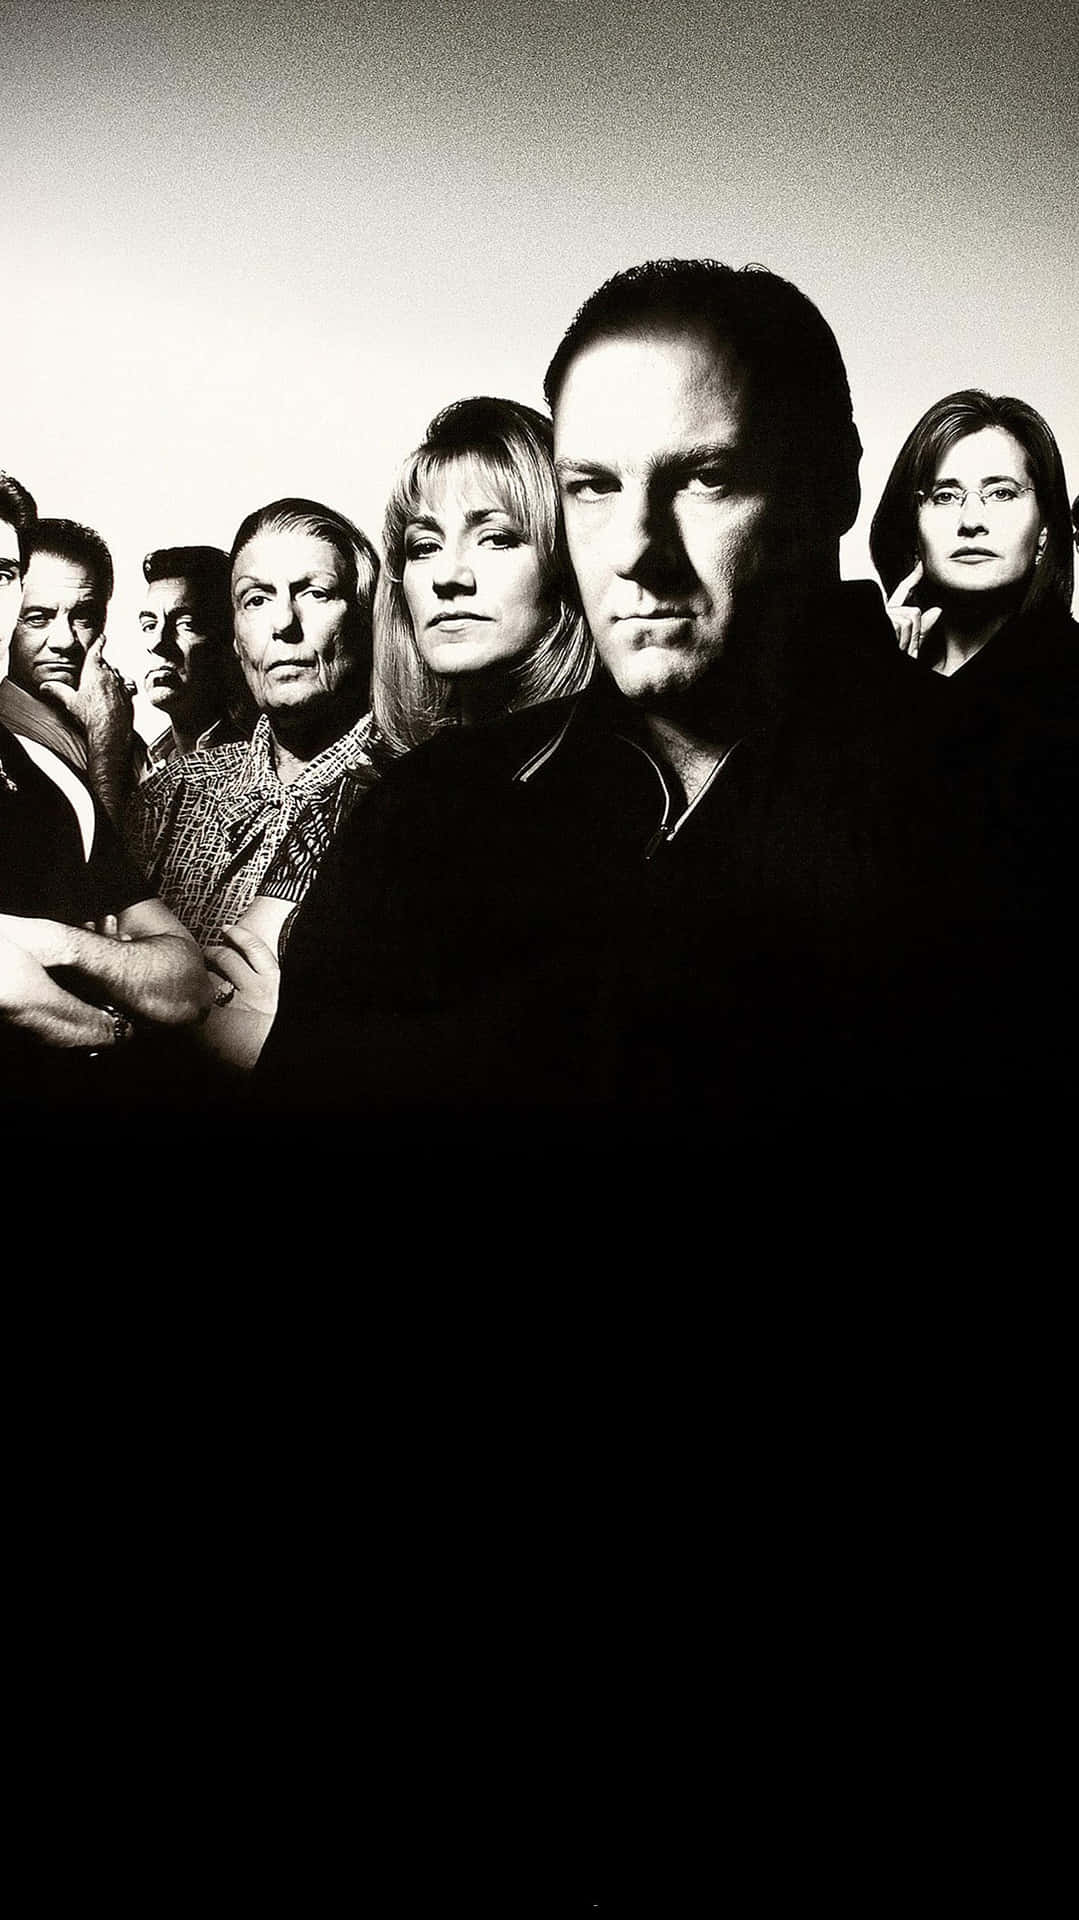 A Black And White Photo Of The Cast Of The Tv Show Wallpaper